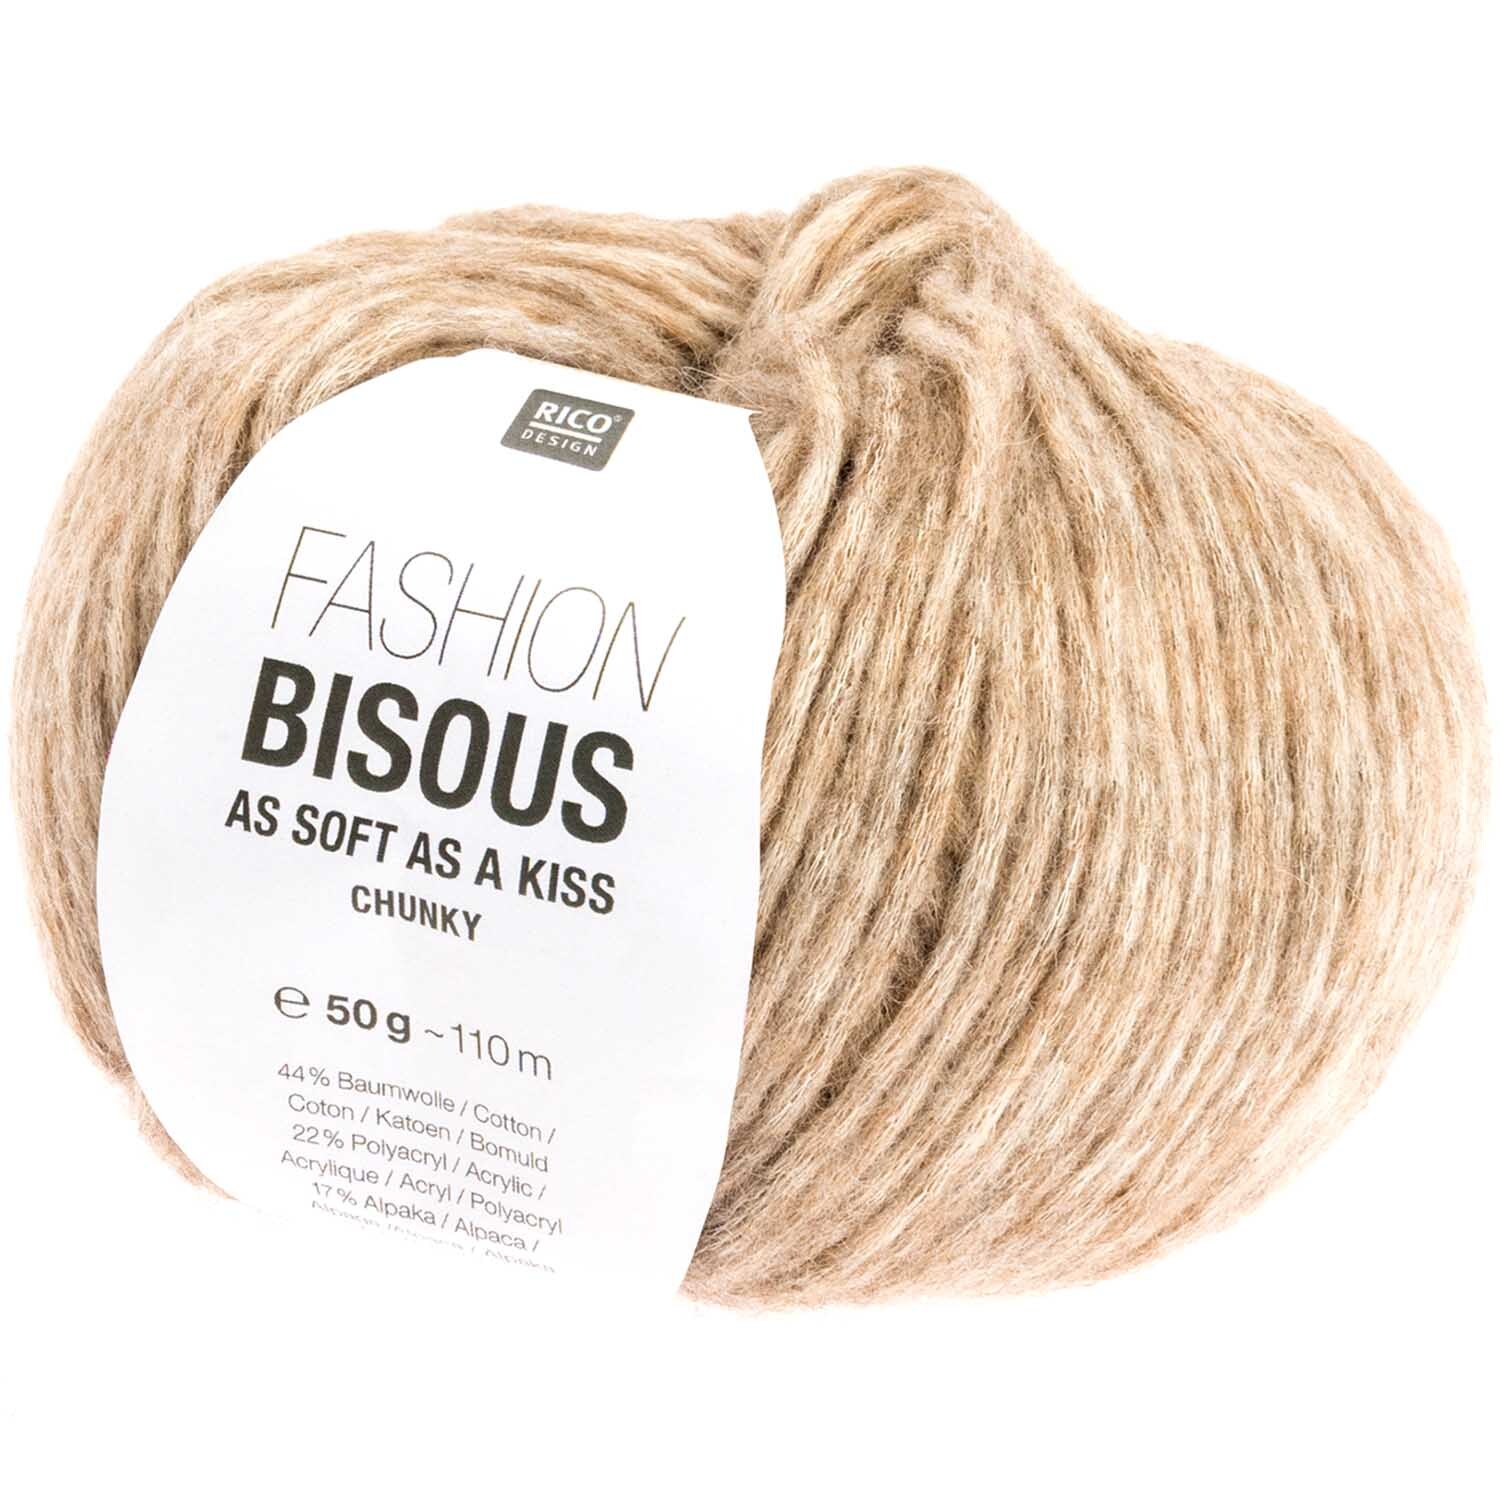 Fashion Bisous Chunky - as soft as a kiss